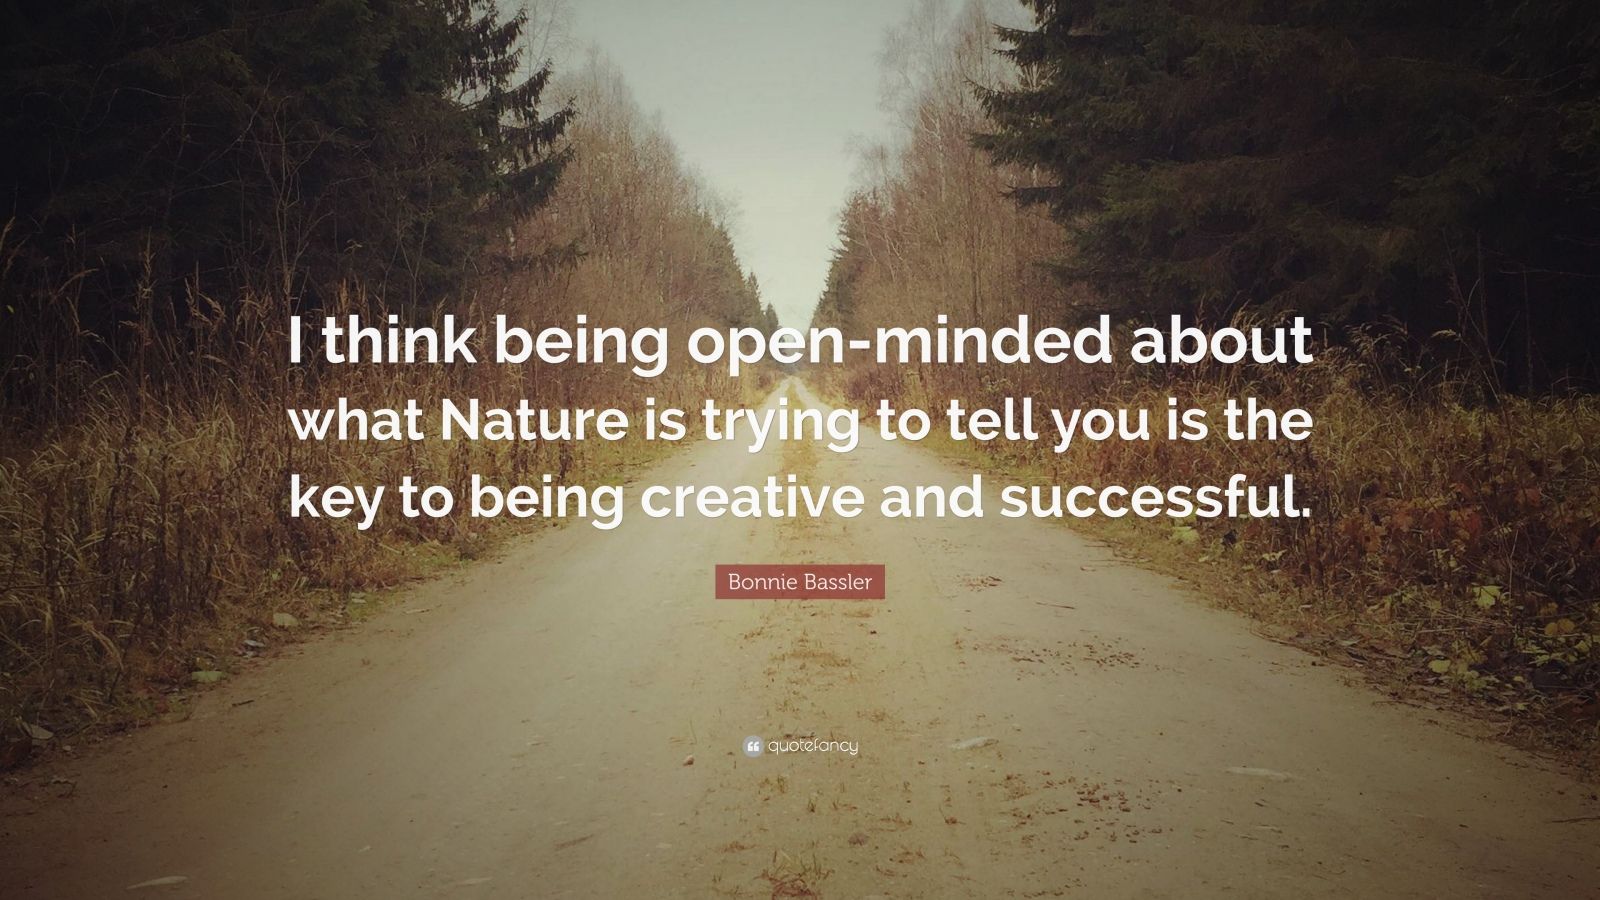 Bonnie Bassler Quote: “I think being open-minded about what Nature is ...